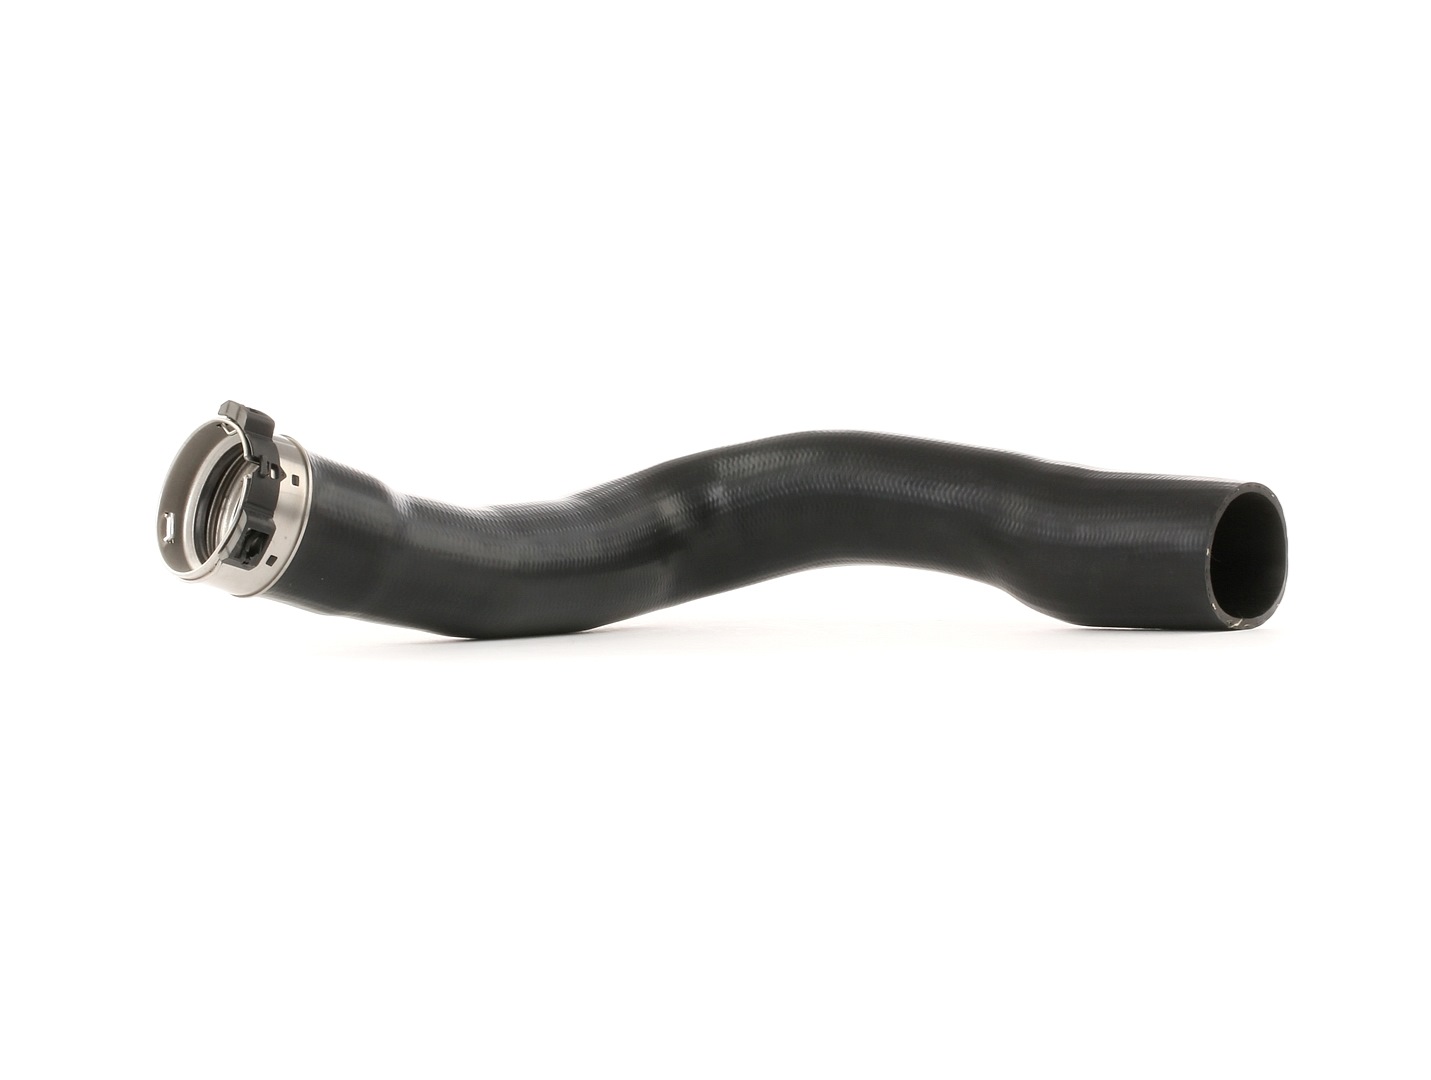 Opel INSIGNIA Pipes and hoses parts - Charger Intake Hose ESEN SKV 24SKV680